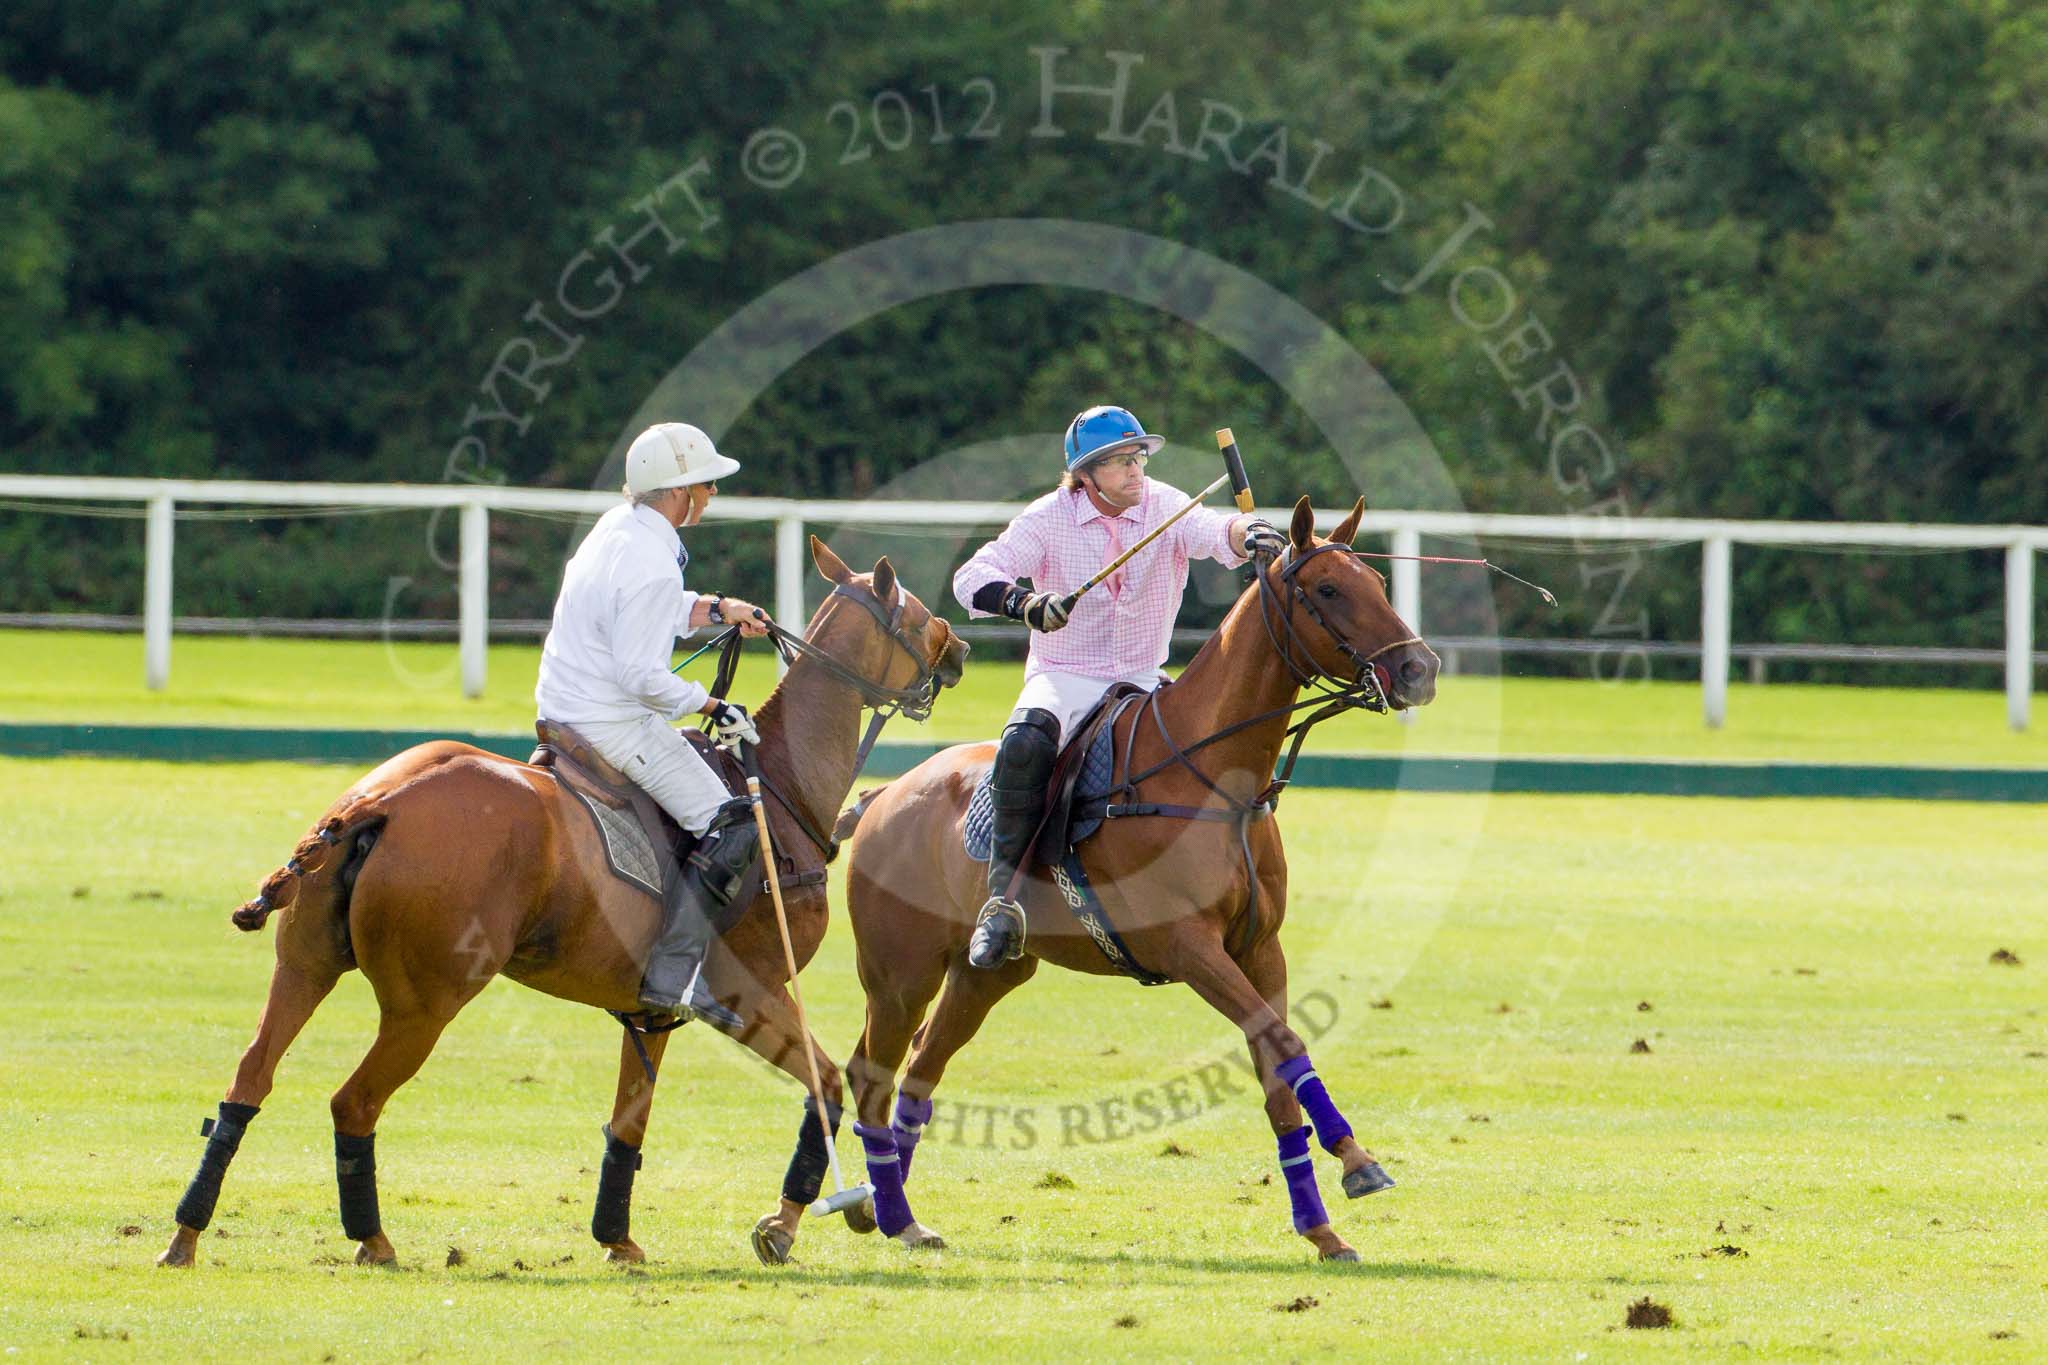 7th Heritage Polo Cup finals: Justo Saveedra changing direction, Paul Oberschneider to follow..
Hurtwood Park Polo Club,
Ewhurst Green,
Surrey,
United Kingdom,
on 05 August 2012 at 16:23, image #217